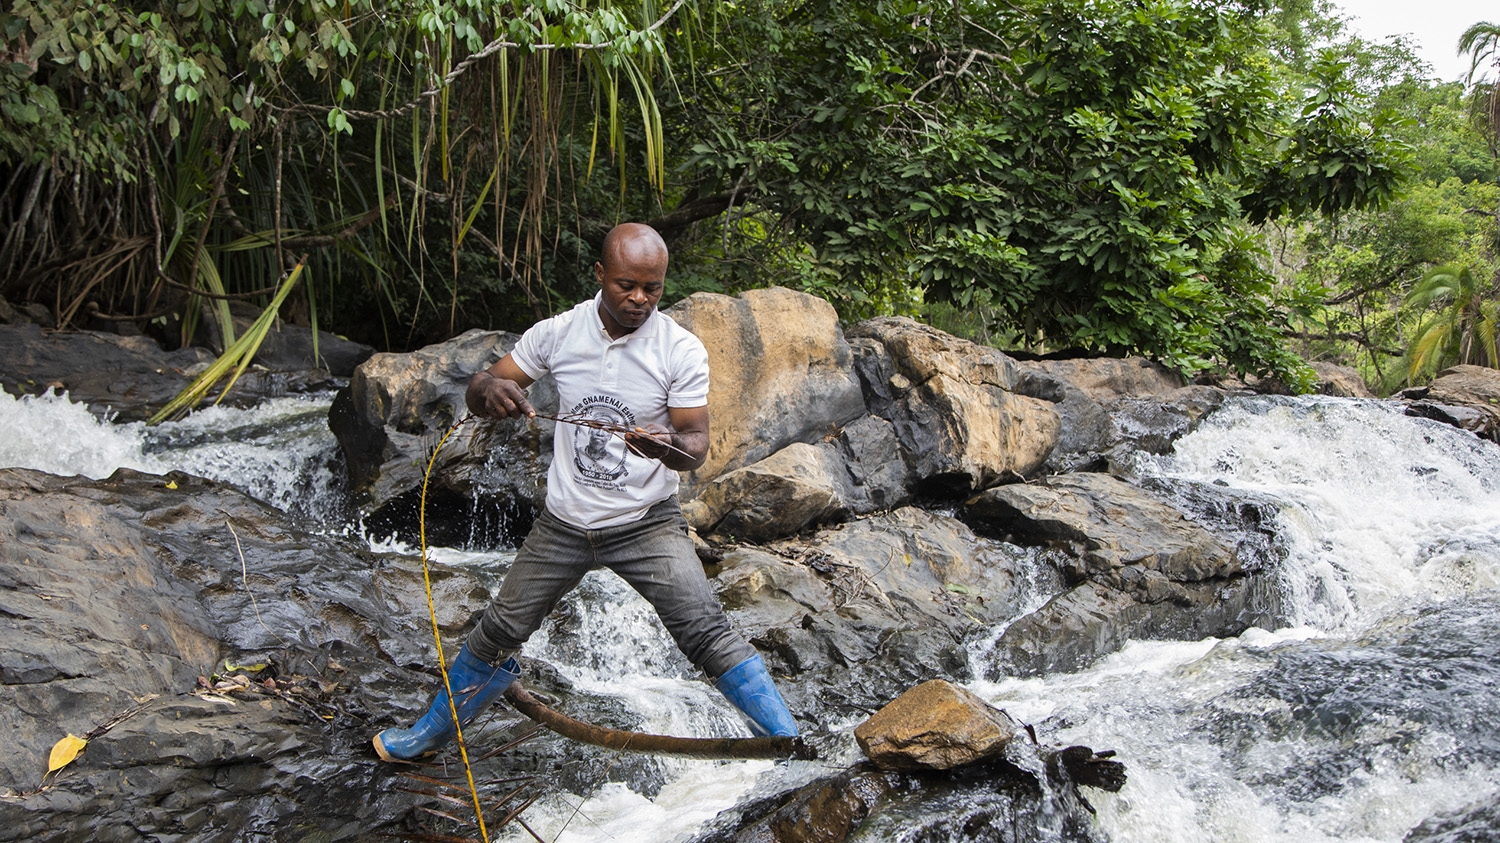 Entomologist Nijikan Soule stands precariously on the banks of a river in Ethiopia while prospecting for fly larvae.